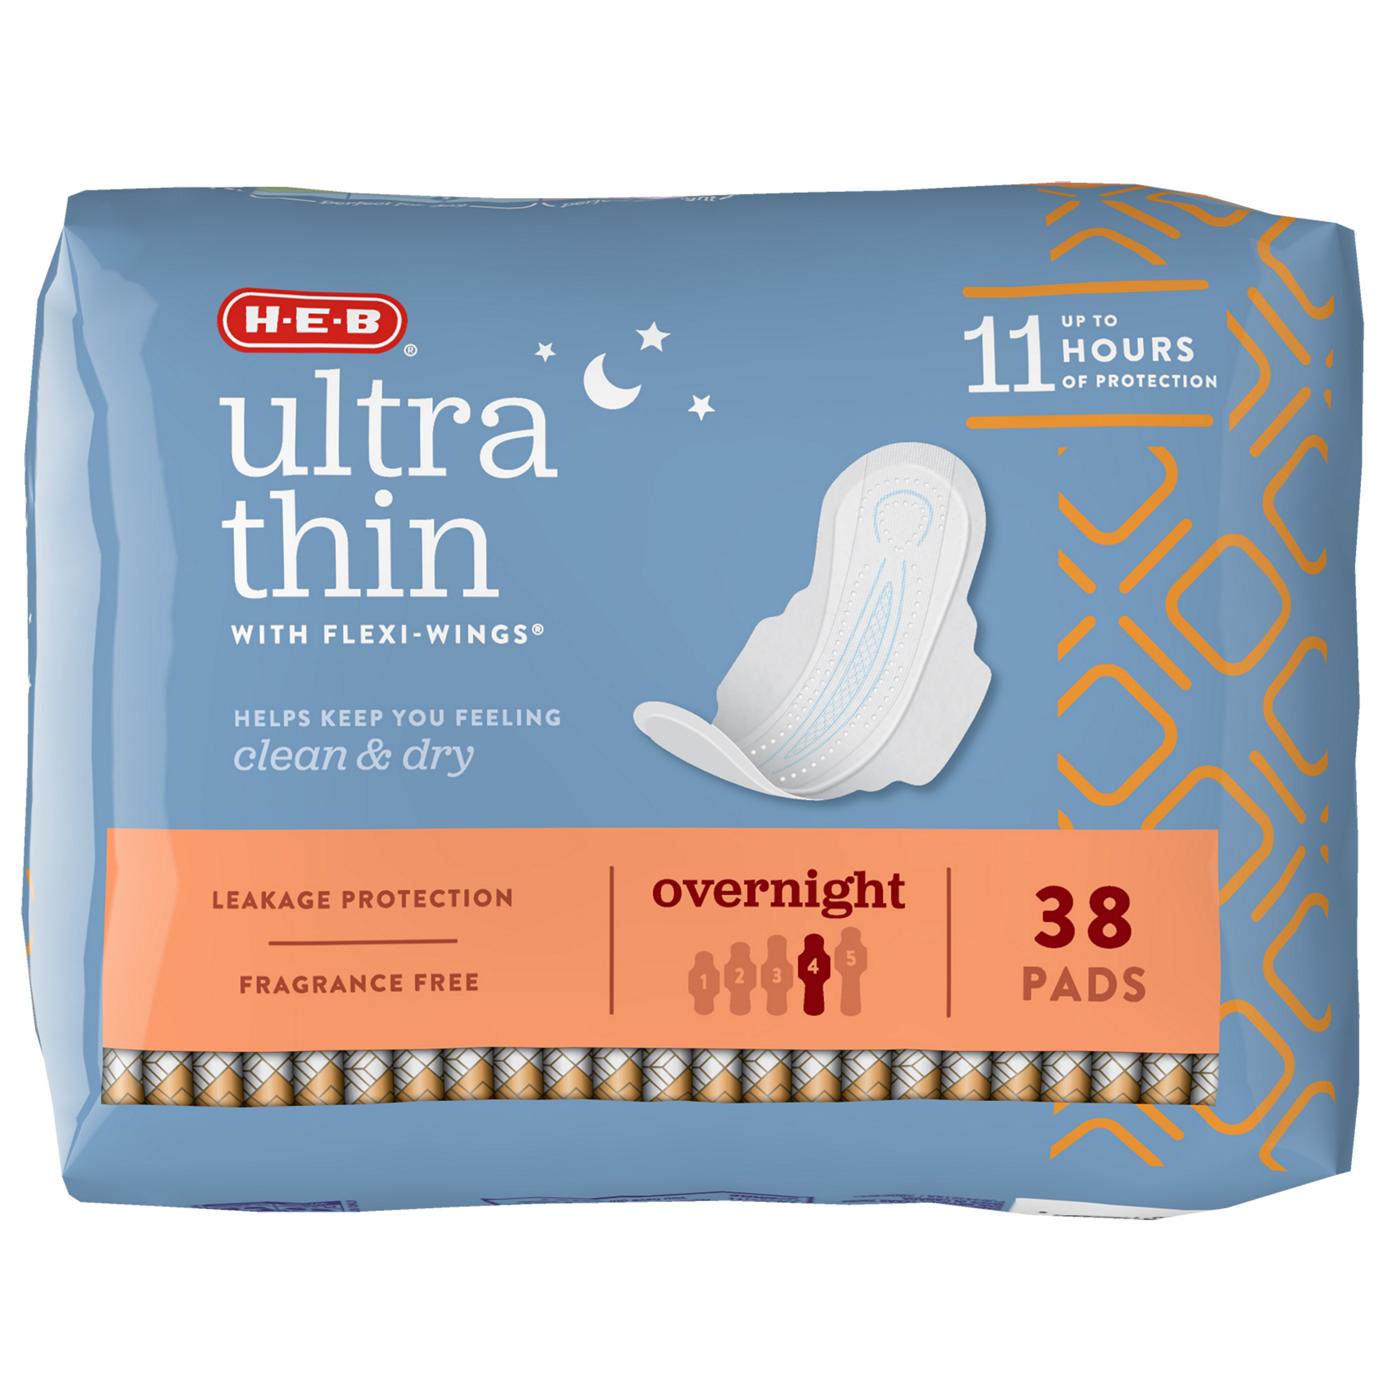 H-E-B Ultra Thin with Flexi-Wings Overnight Pads; image 6 of 7